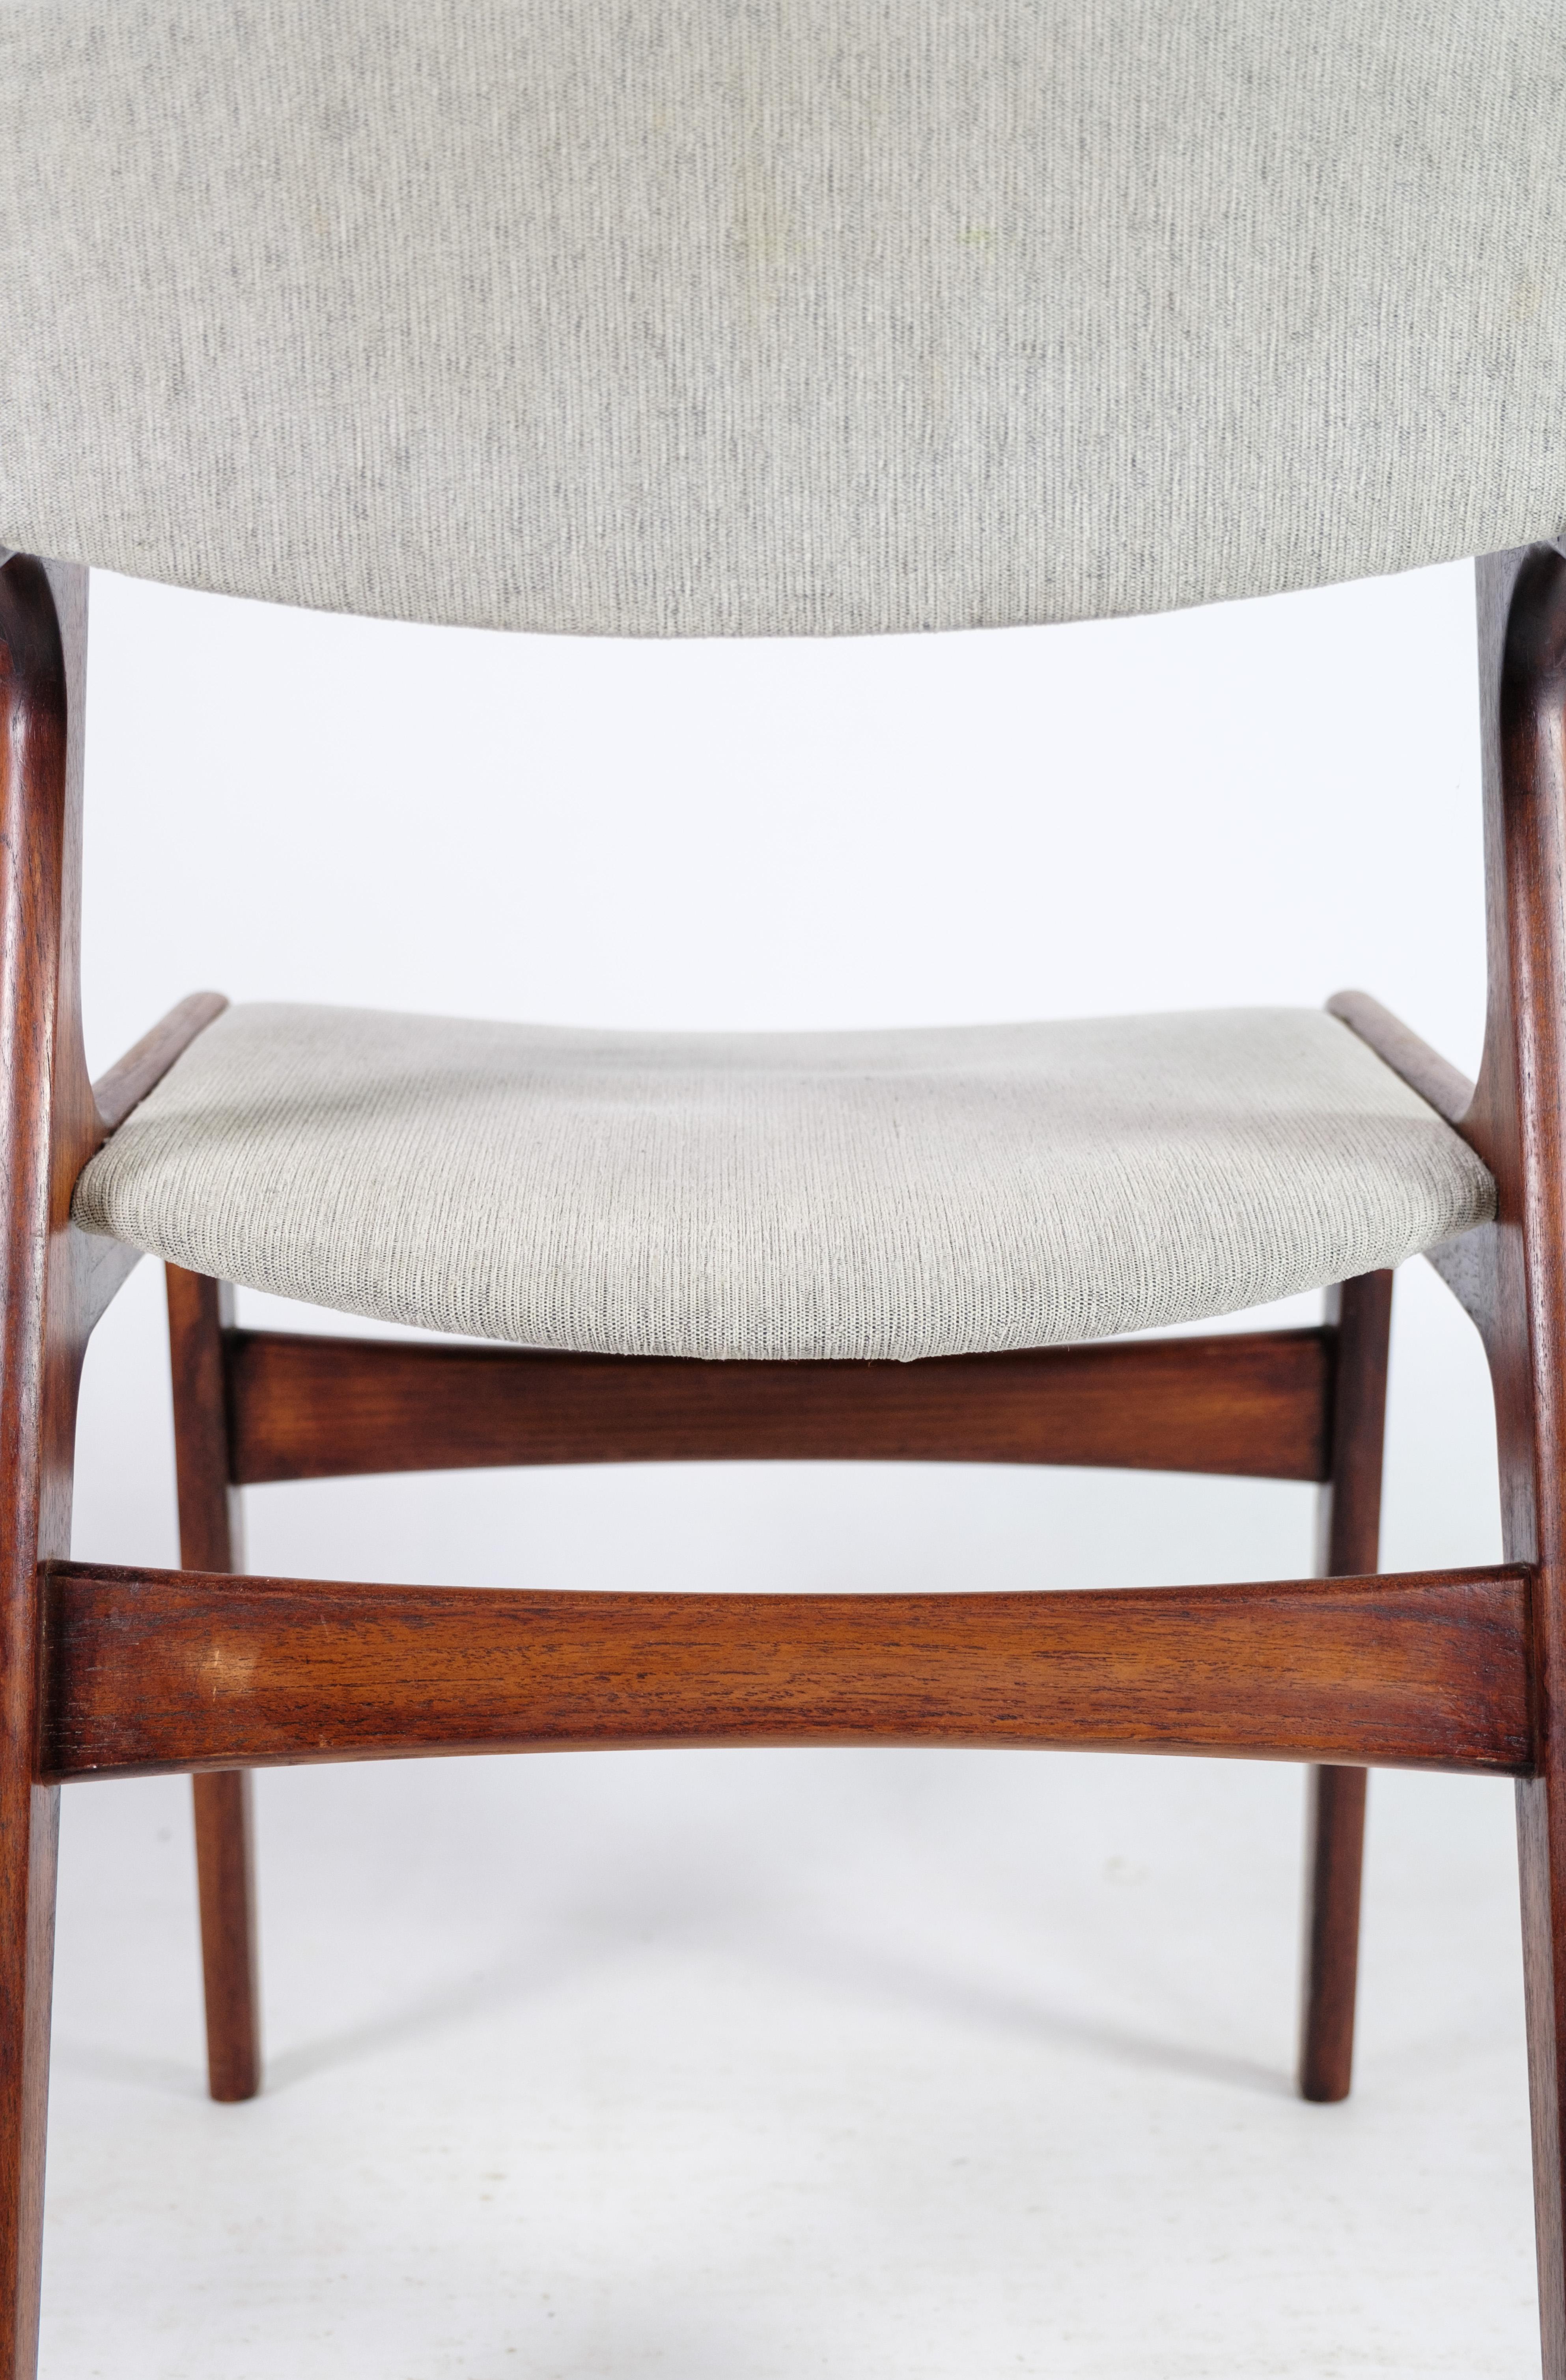 Set of 4 Dining Chairs, Teak, Nova Furniture, 1960s For Sale 1